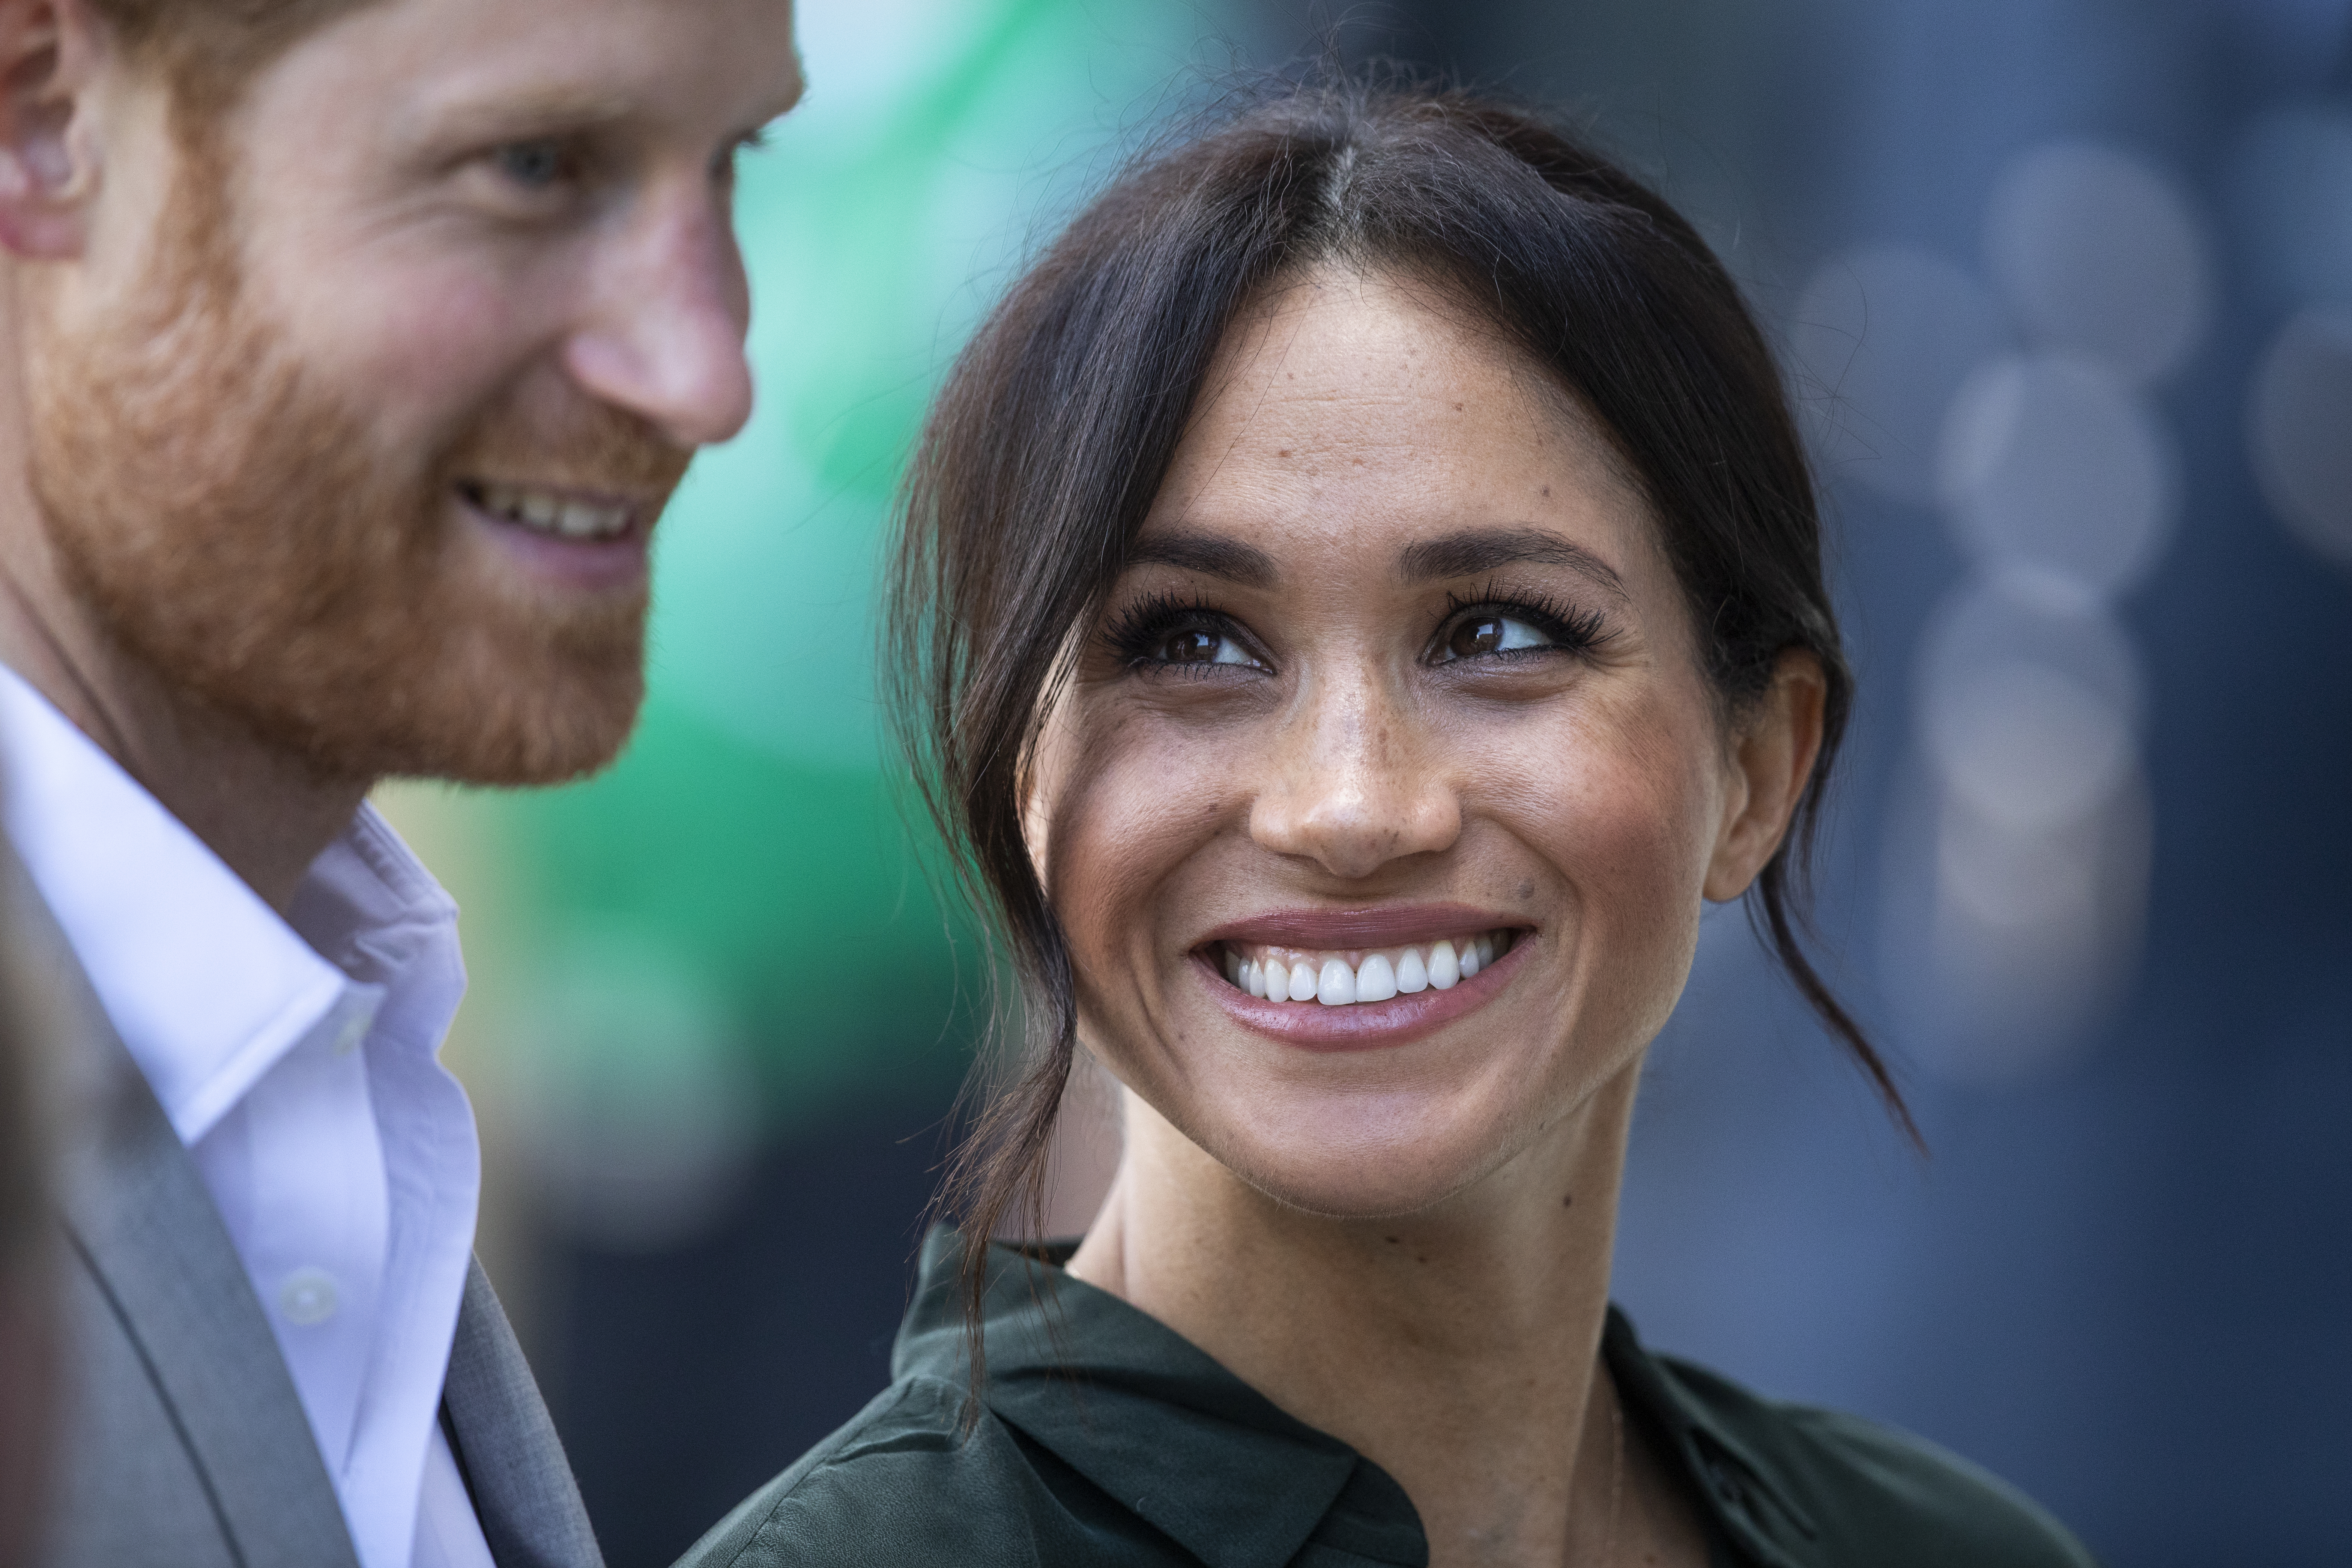 Prince Harry And Meghan Markle's First Netflix Series Has Been